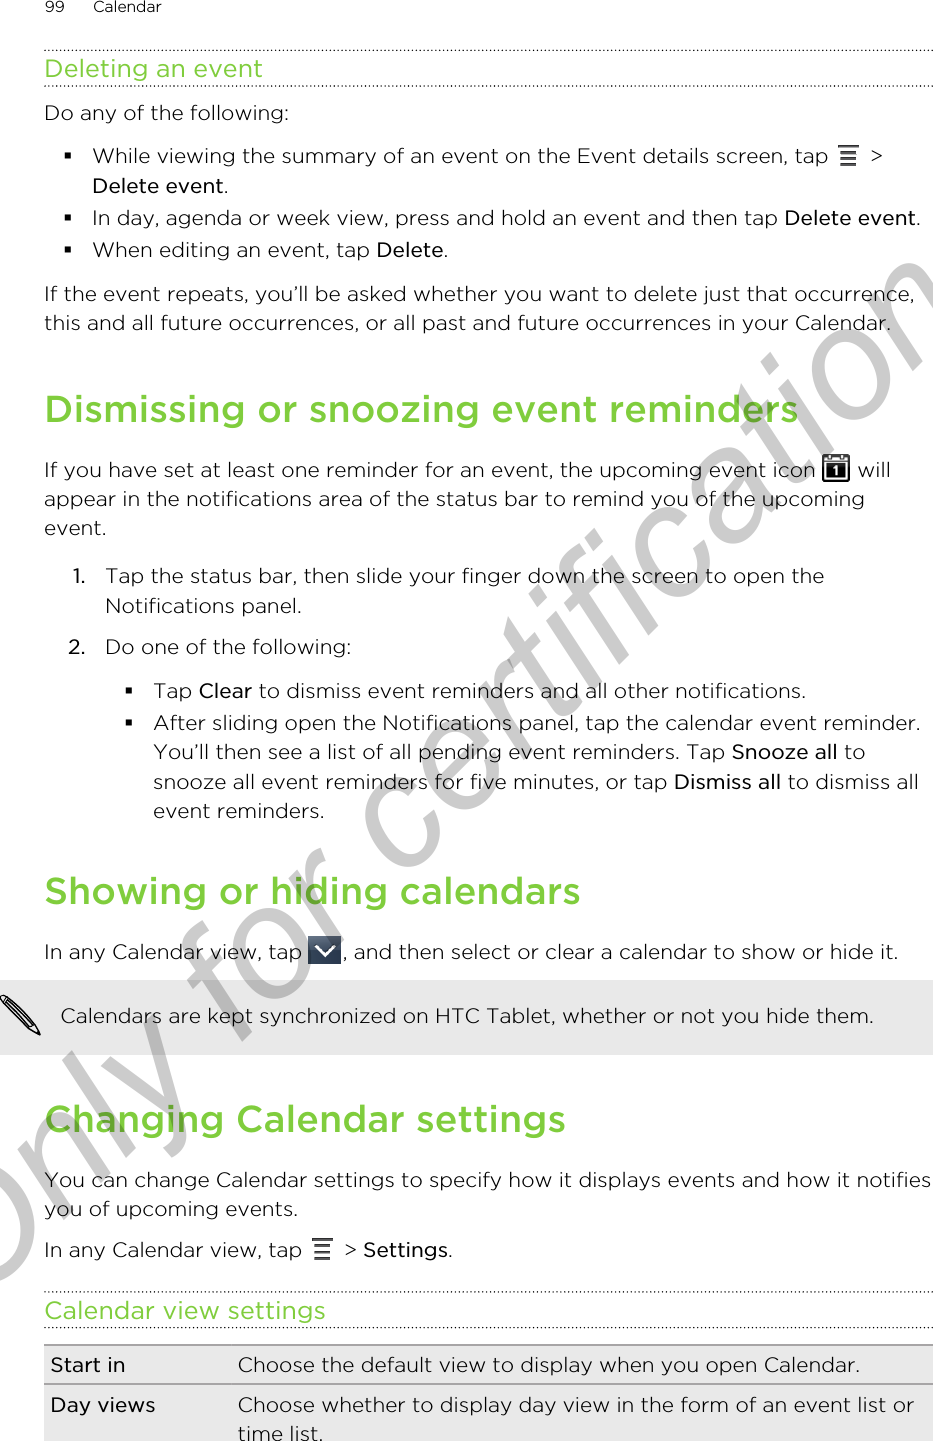 Deleting an eventDo any of the following:§While viewing the summary of an event on the Event details screen, tap   &gt;Delete event.§In day, agenda or week view, press and hold an event and then tap Delete event.§When editing an event, tap Delete.If the event repeats, you’ll be asked whether you want to delete just that occurrence,this and all future occurrences, or all past and future occurrences in your Calendar.Dismissing or snoozing event remindersIf you have set at least one reminder for an event, the upcoming event icon   willappear in the notifications area of the status bar to remind you of the upcomingevent.1. Tap the status bar, then slide your finger down the screen to open theNotifications panel.2. Do one of the following:§Tap Clear to dismiss event reminders and all other notifications.§After sliding open the Notifications panel, tap the calendar event reminder.You’ll then see a list of all pending event reminders. Tap Snooze all tosnooze all event reminders for five minutes, or tap Dismiss all to dismiss allevent reminders.Showing or hiding calendarsIn any Calendar view, tap  , and then select or clear a calendar to show or hide it. Calendars are kept synchronized on HTC Tablet, whether or not you hide them.Changing Calendar settingsYou can change Calendar settings to specify how it displays events and how it notifiesyou of upcoming events.In any Calendar view, tap   &gt; Settings.Calendar view settingsStart in Choose the default view to display when you open Calendar.Day views Choose whether to display day view in the form of an event list ortime list.99 CalendarOnly for certification